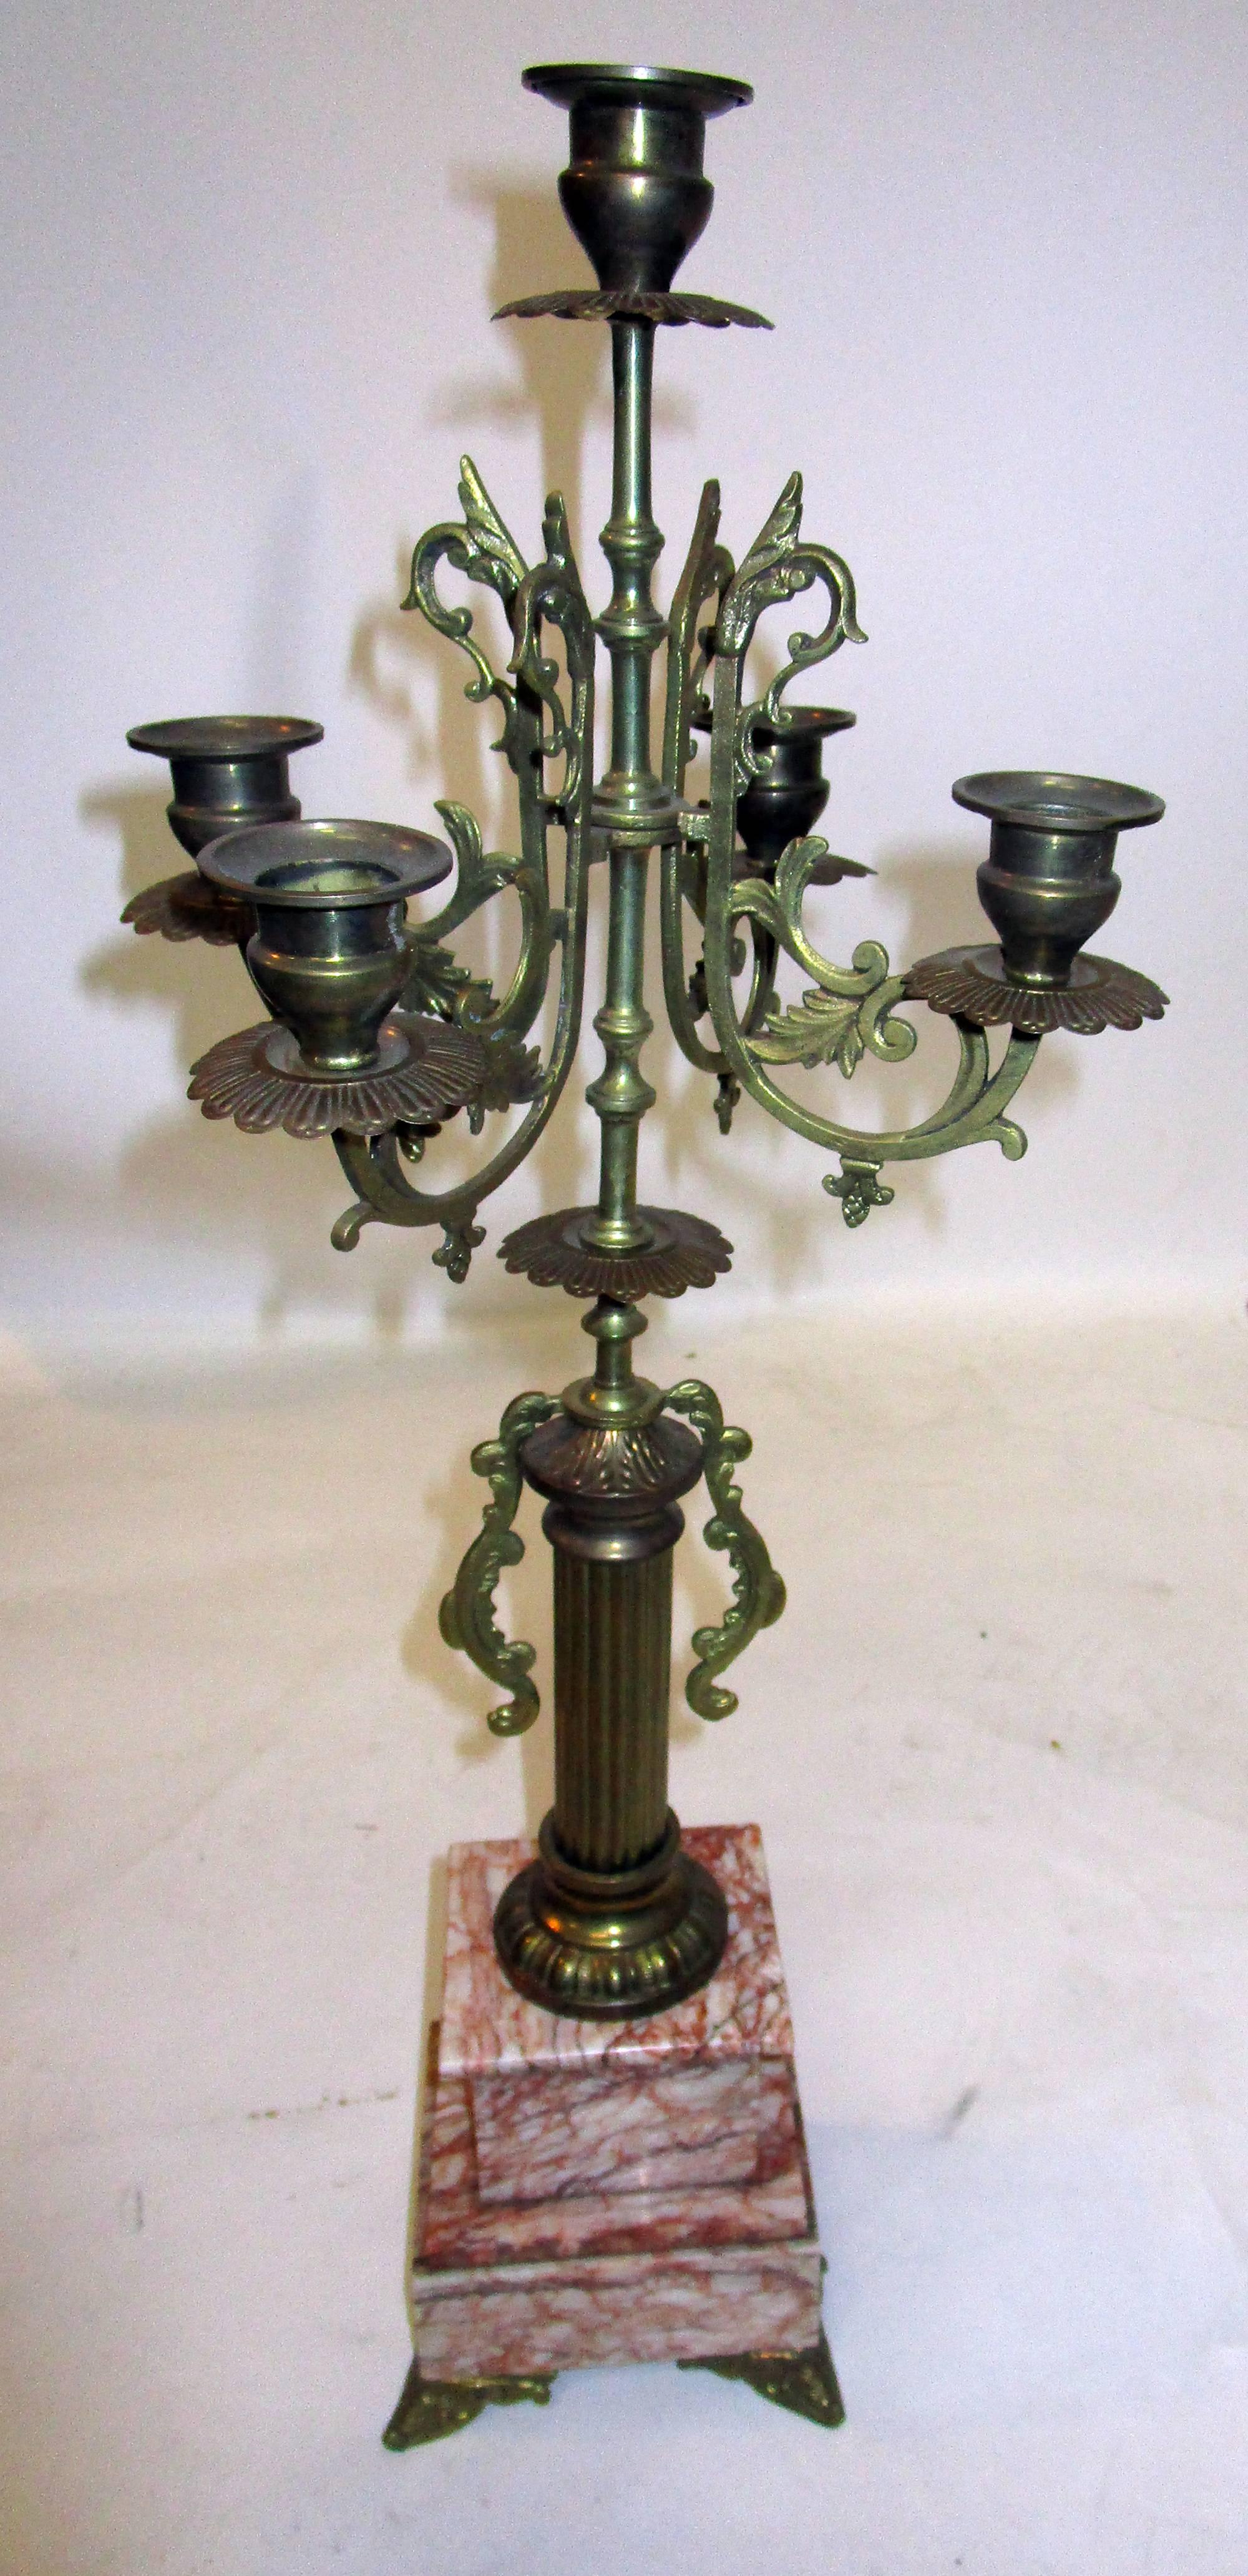 Handsome pair of 19th French mantel garniture feature heavy brass mounts with a serpentine design, Classic columns and five candle arms. The feet are curved in the front and straight in the back. The lovely rouge marble bases, further enhance these